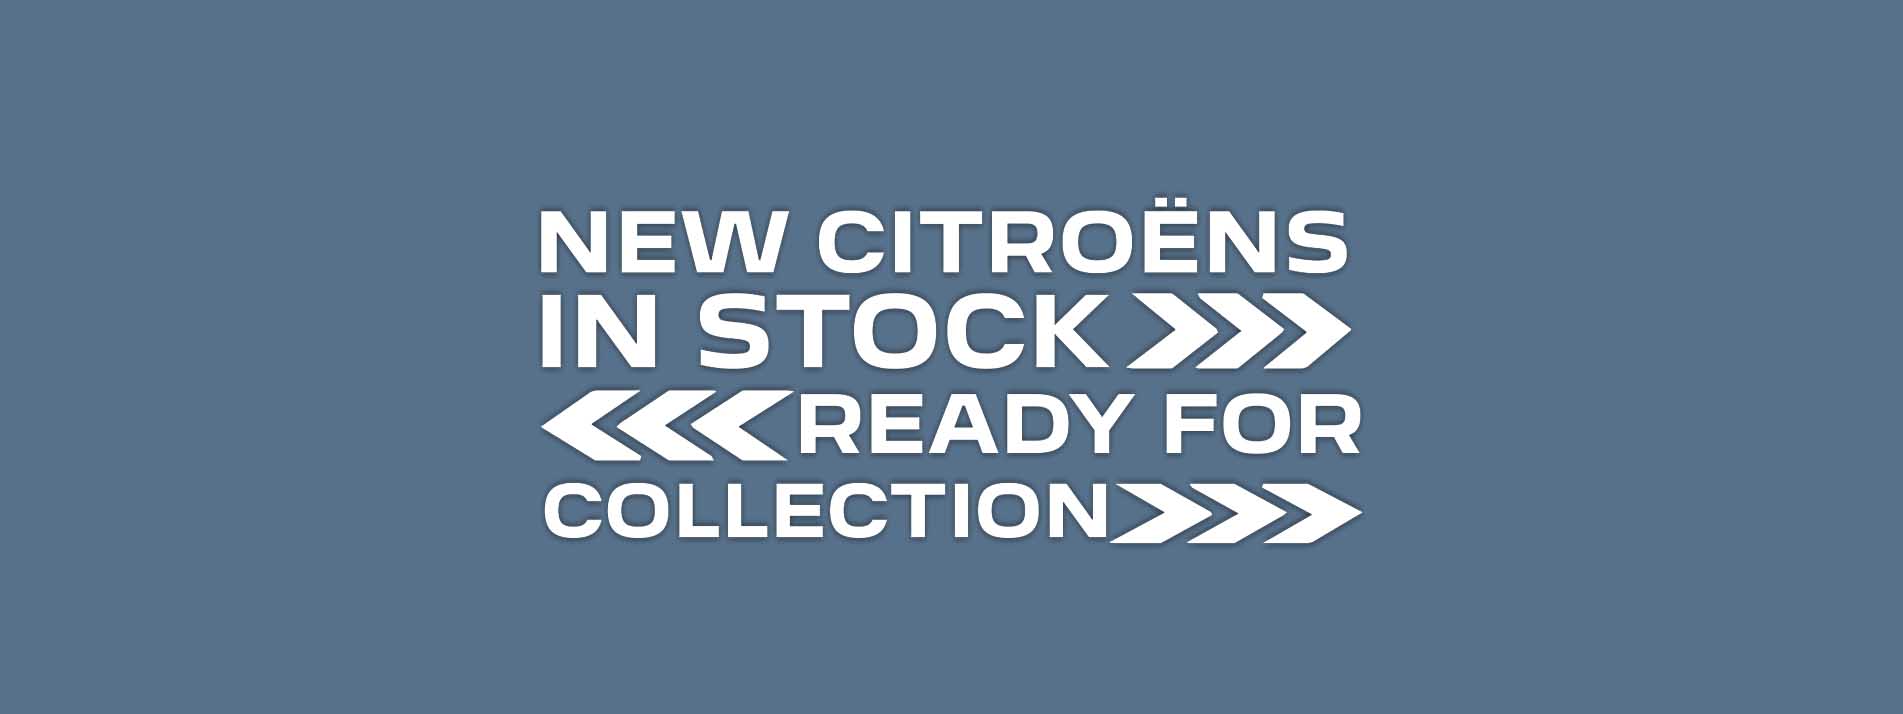 citroen-petrols-diesels--hybrid-electrics-in-stock-and-ready-for-collection-m-sli